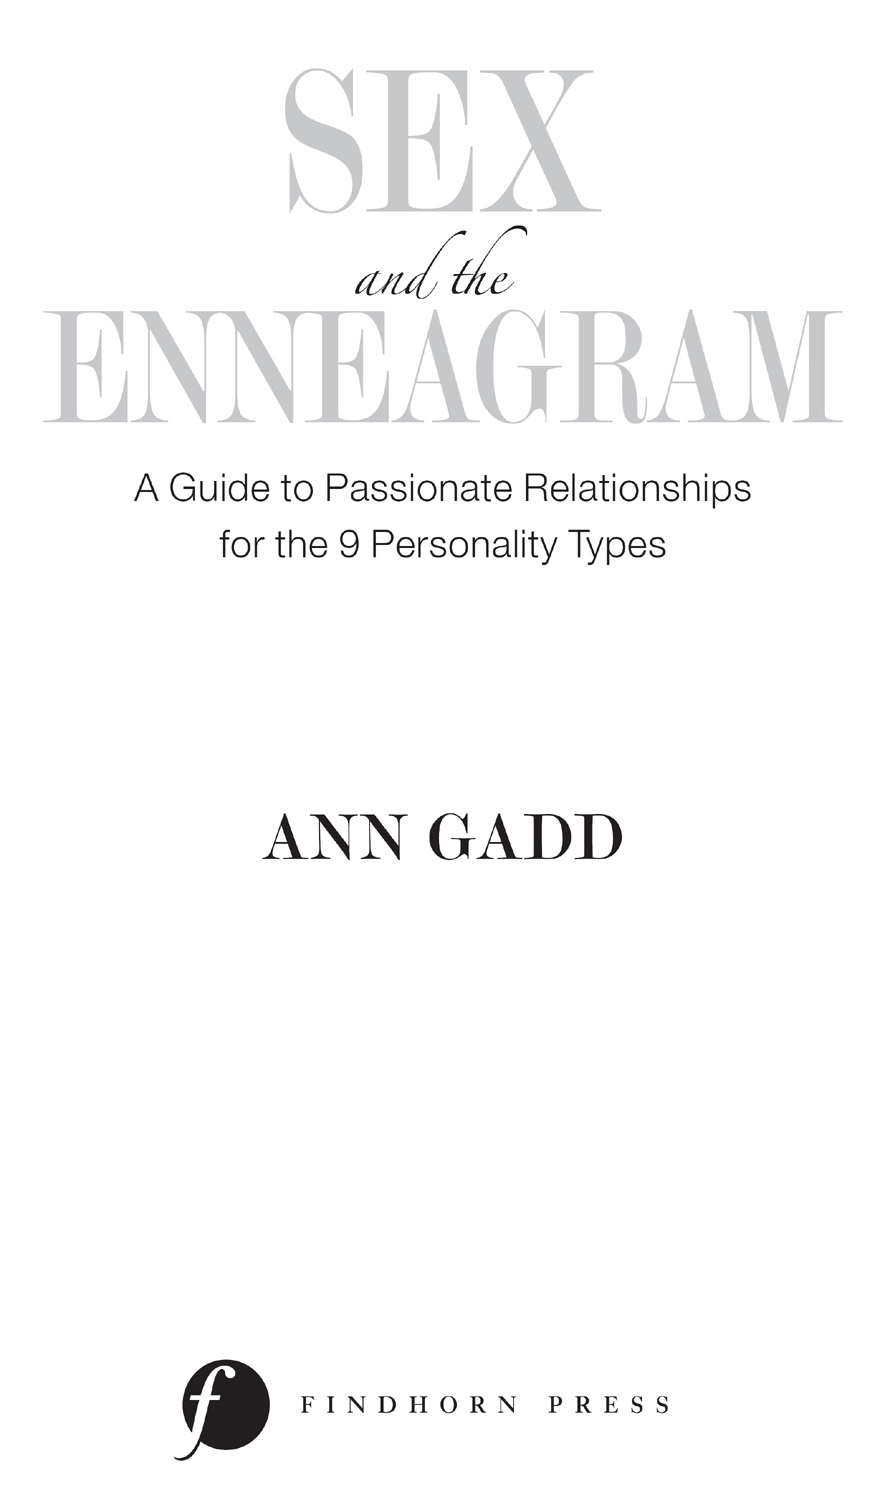 Sex and the Enneagram A Guide to Passionate Relationships for the 9 Personality Types - image 2